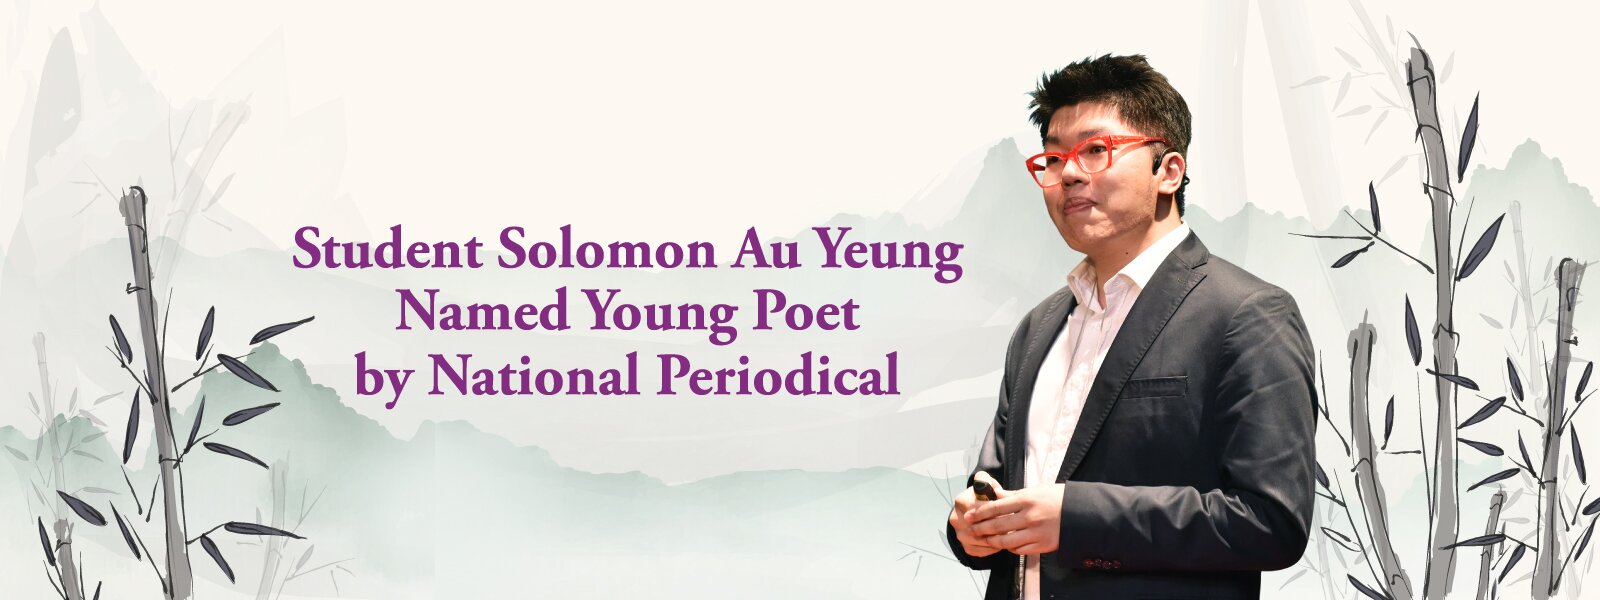 Student Solomon Au Yeung Named Young Poet by National Periodical